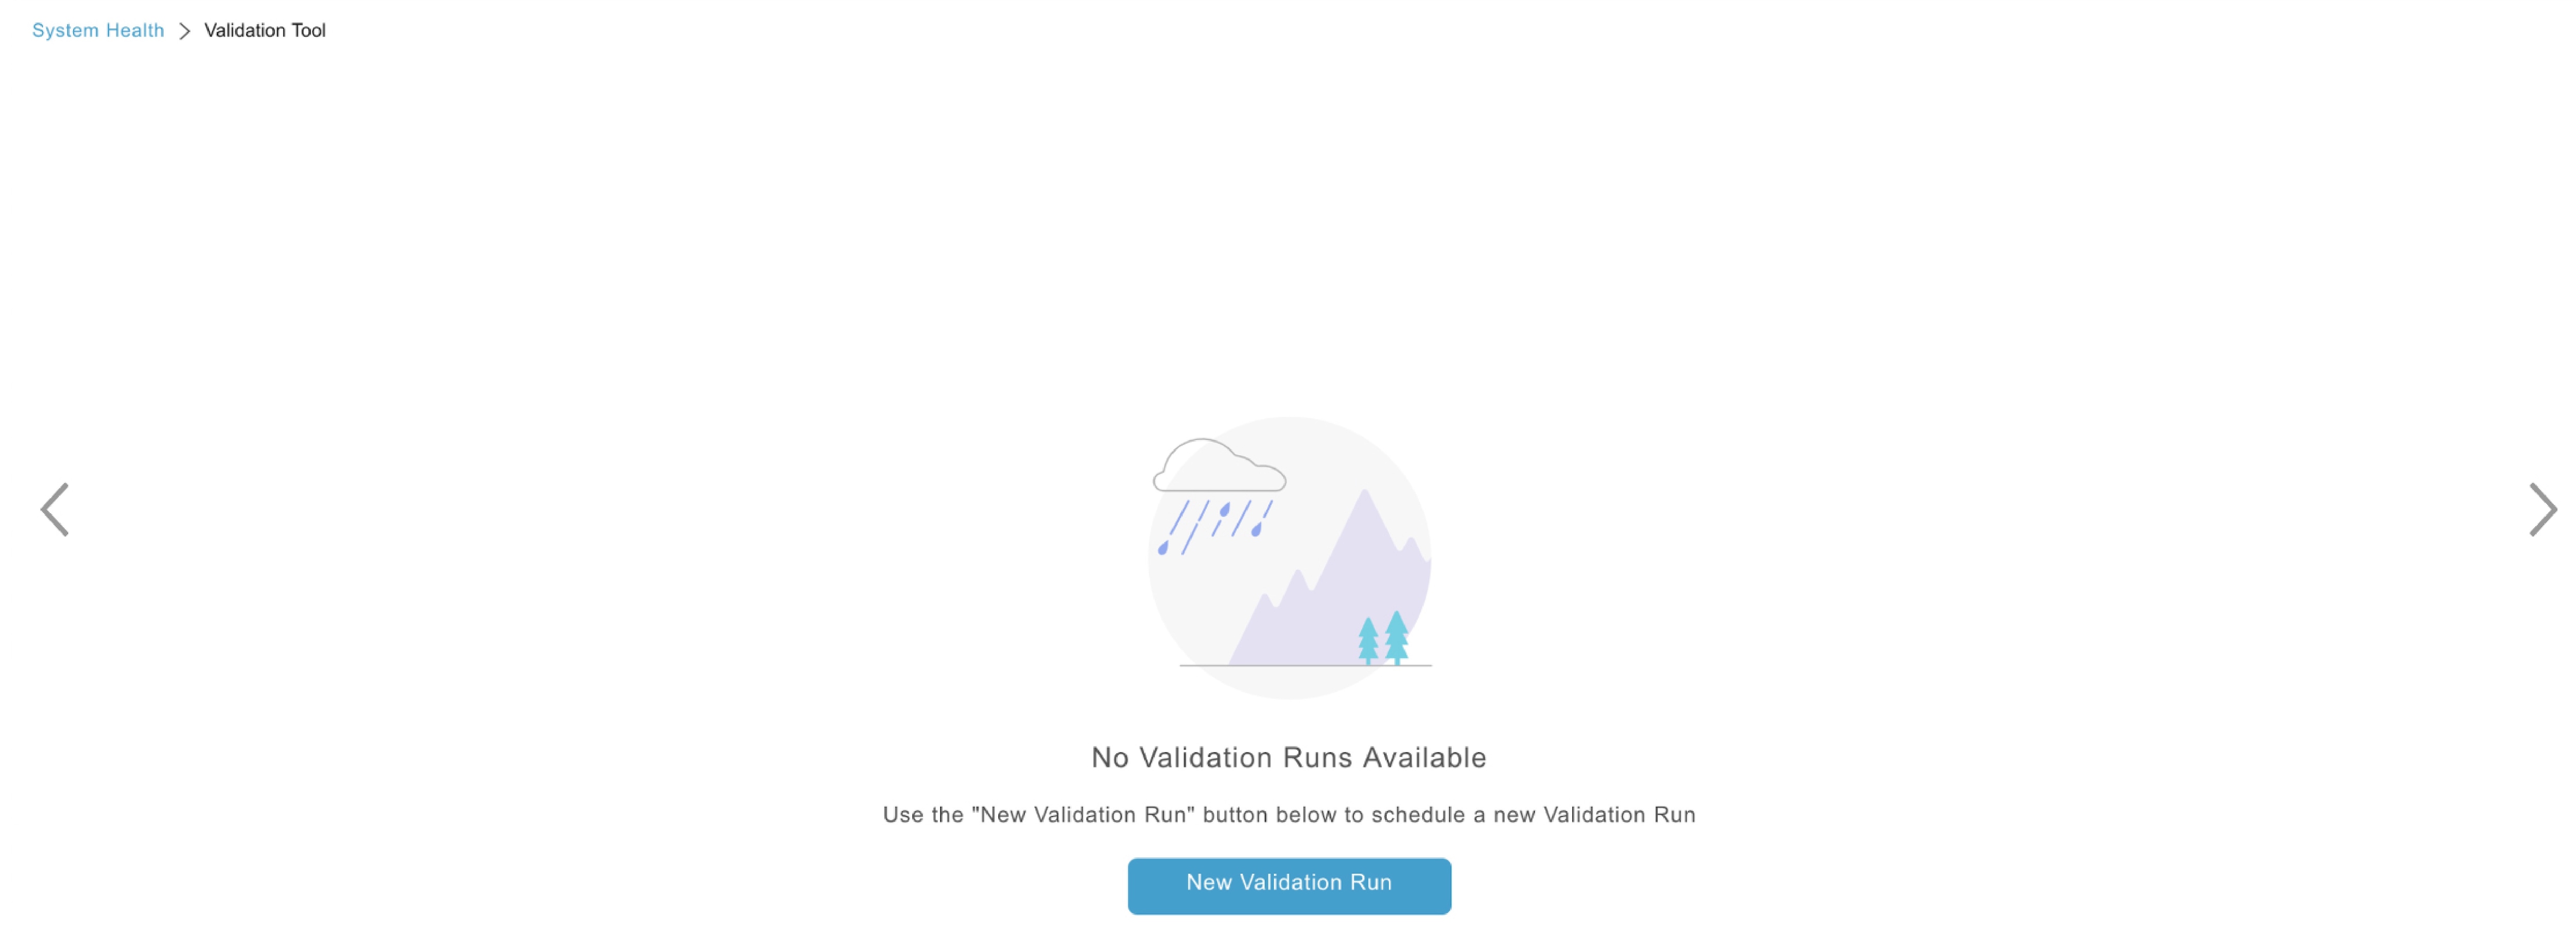 Content of Validation Tool page when there are no validation runs completed previously